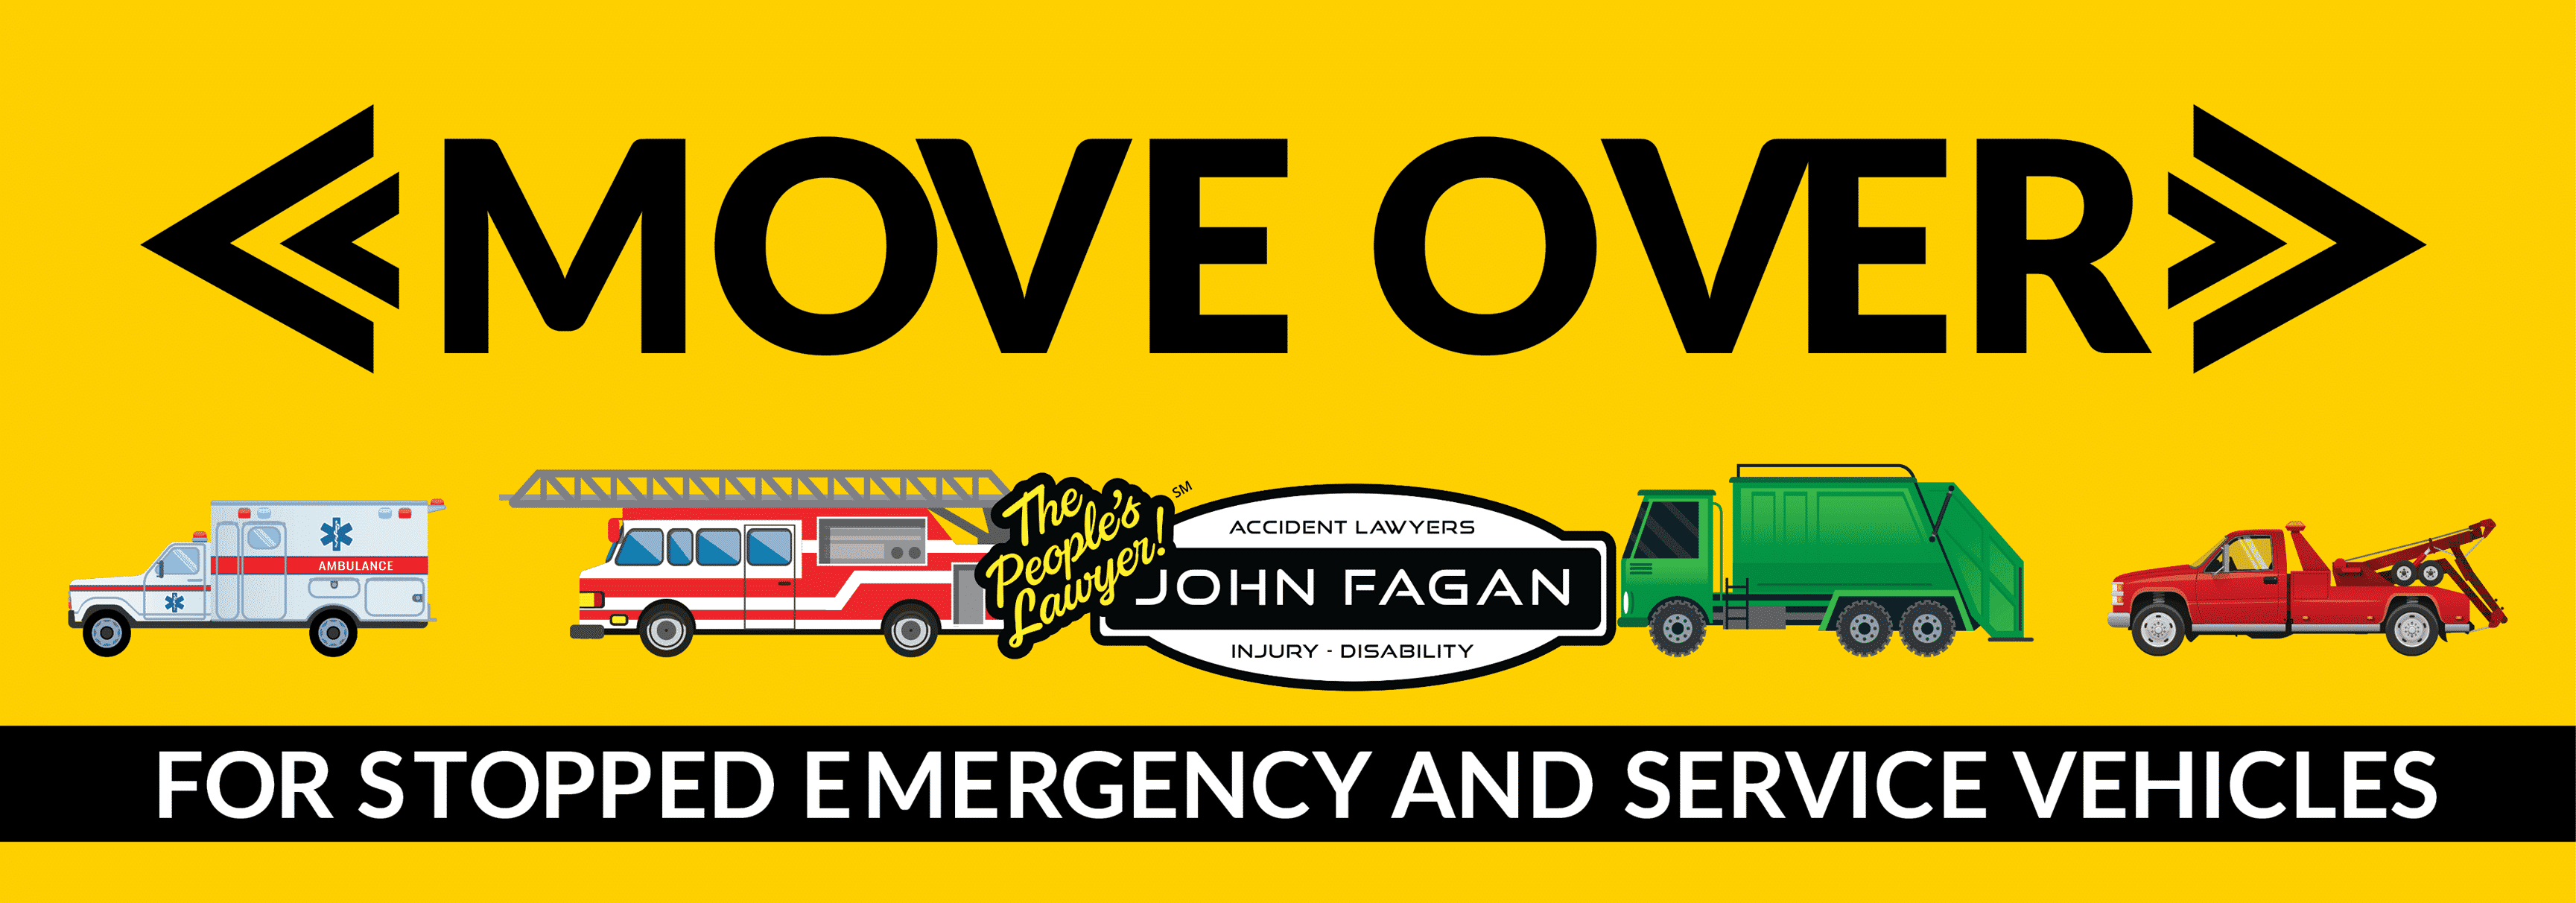 Florida law requires you to Move Over a lane — when you can safely do so — for stopped law enforcement, emergency, sanitation, utility service vehicles and tow trucks or wreckers